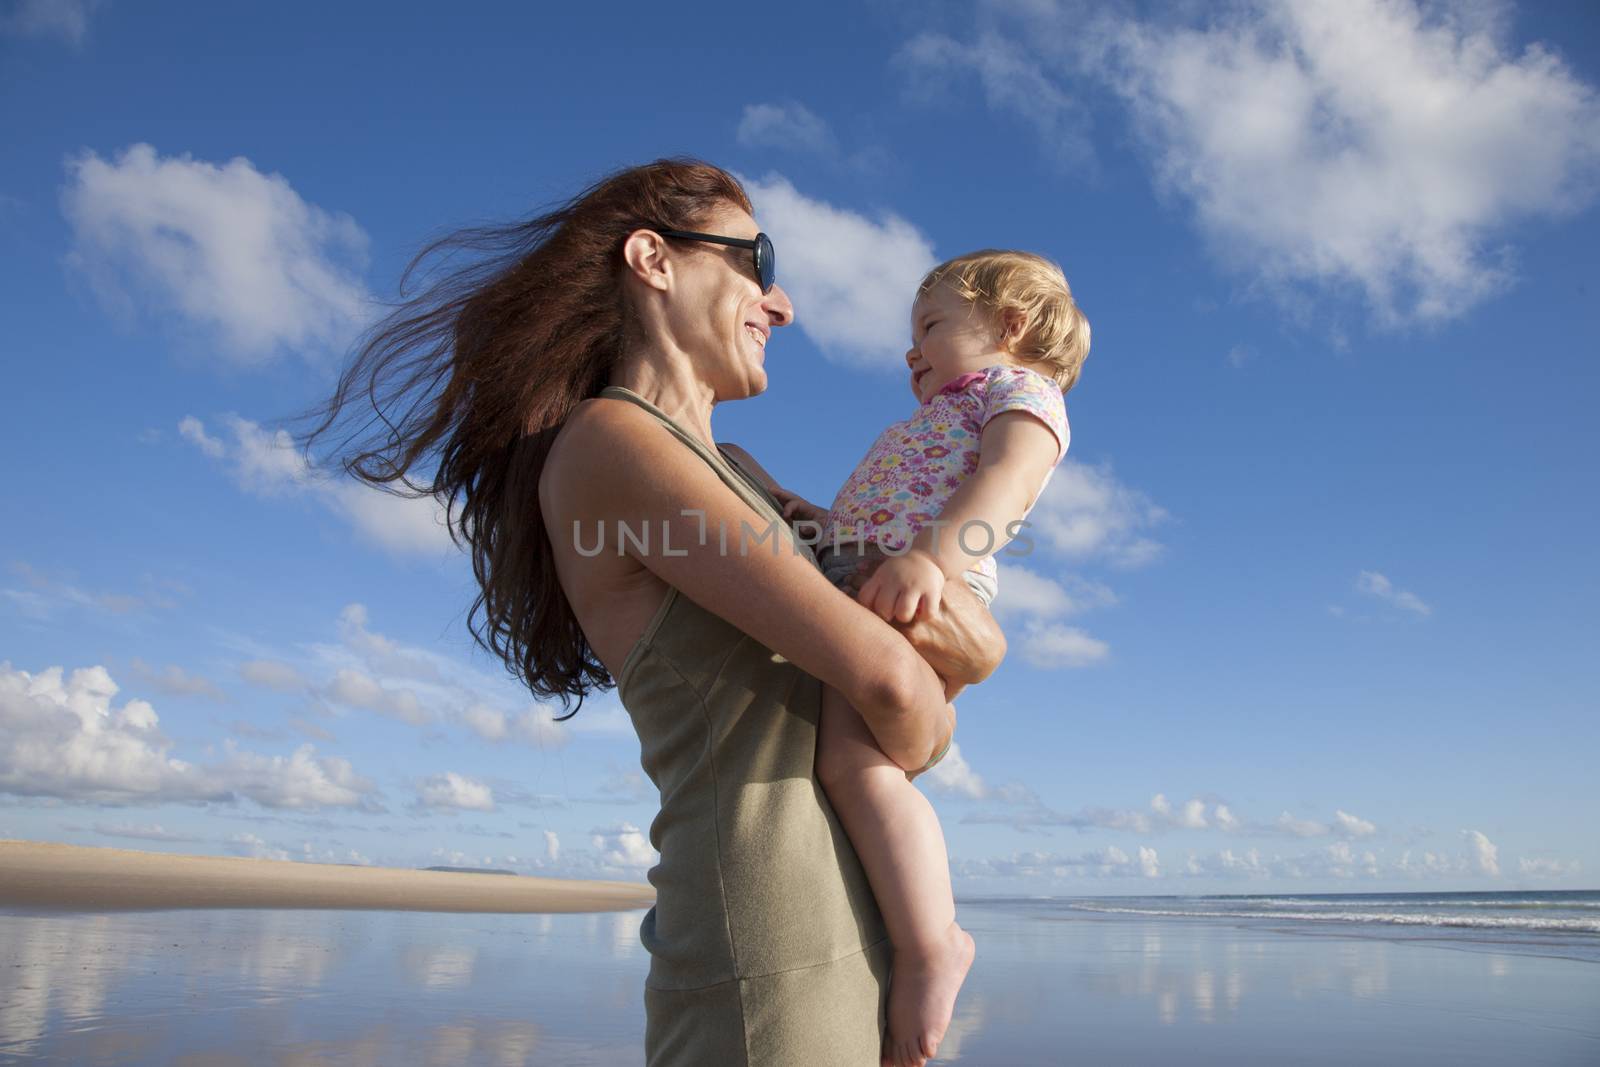 happy green dress woman with sunglasses and one year blonde baby in her arms at beach Conil Cadiz Spain